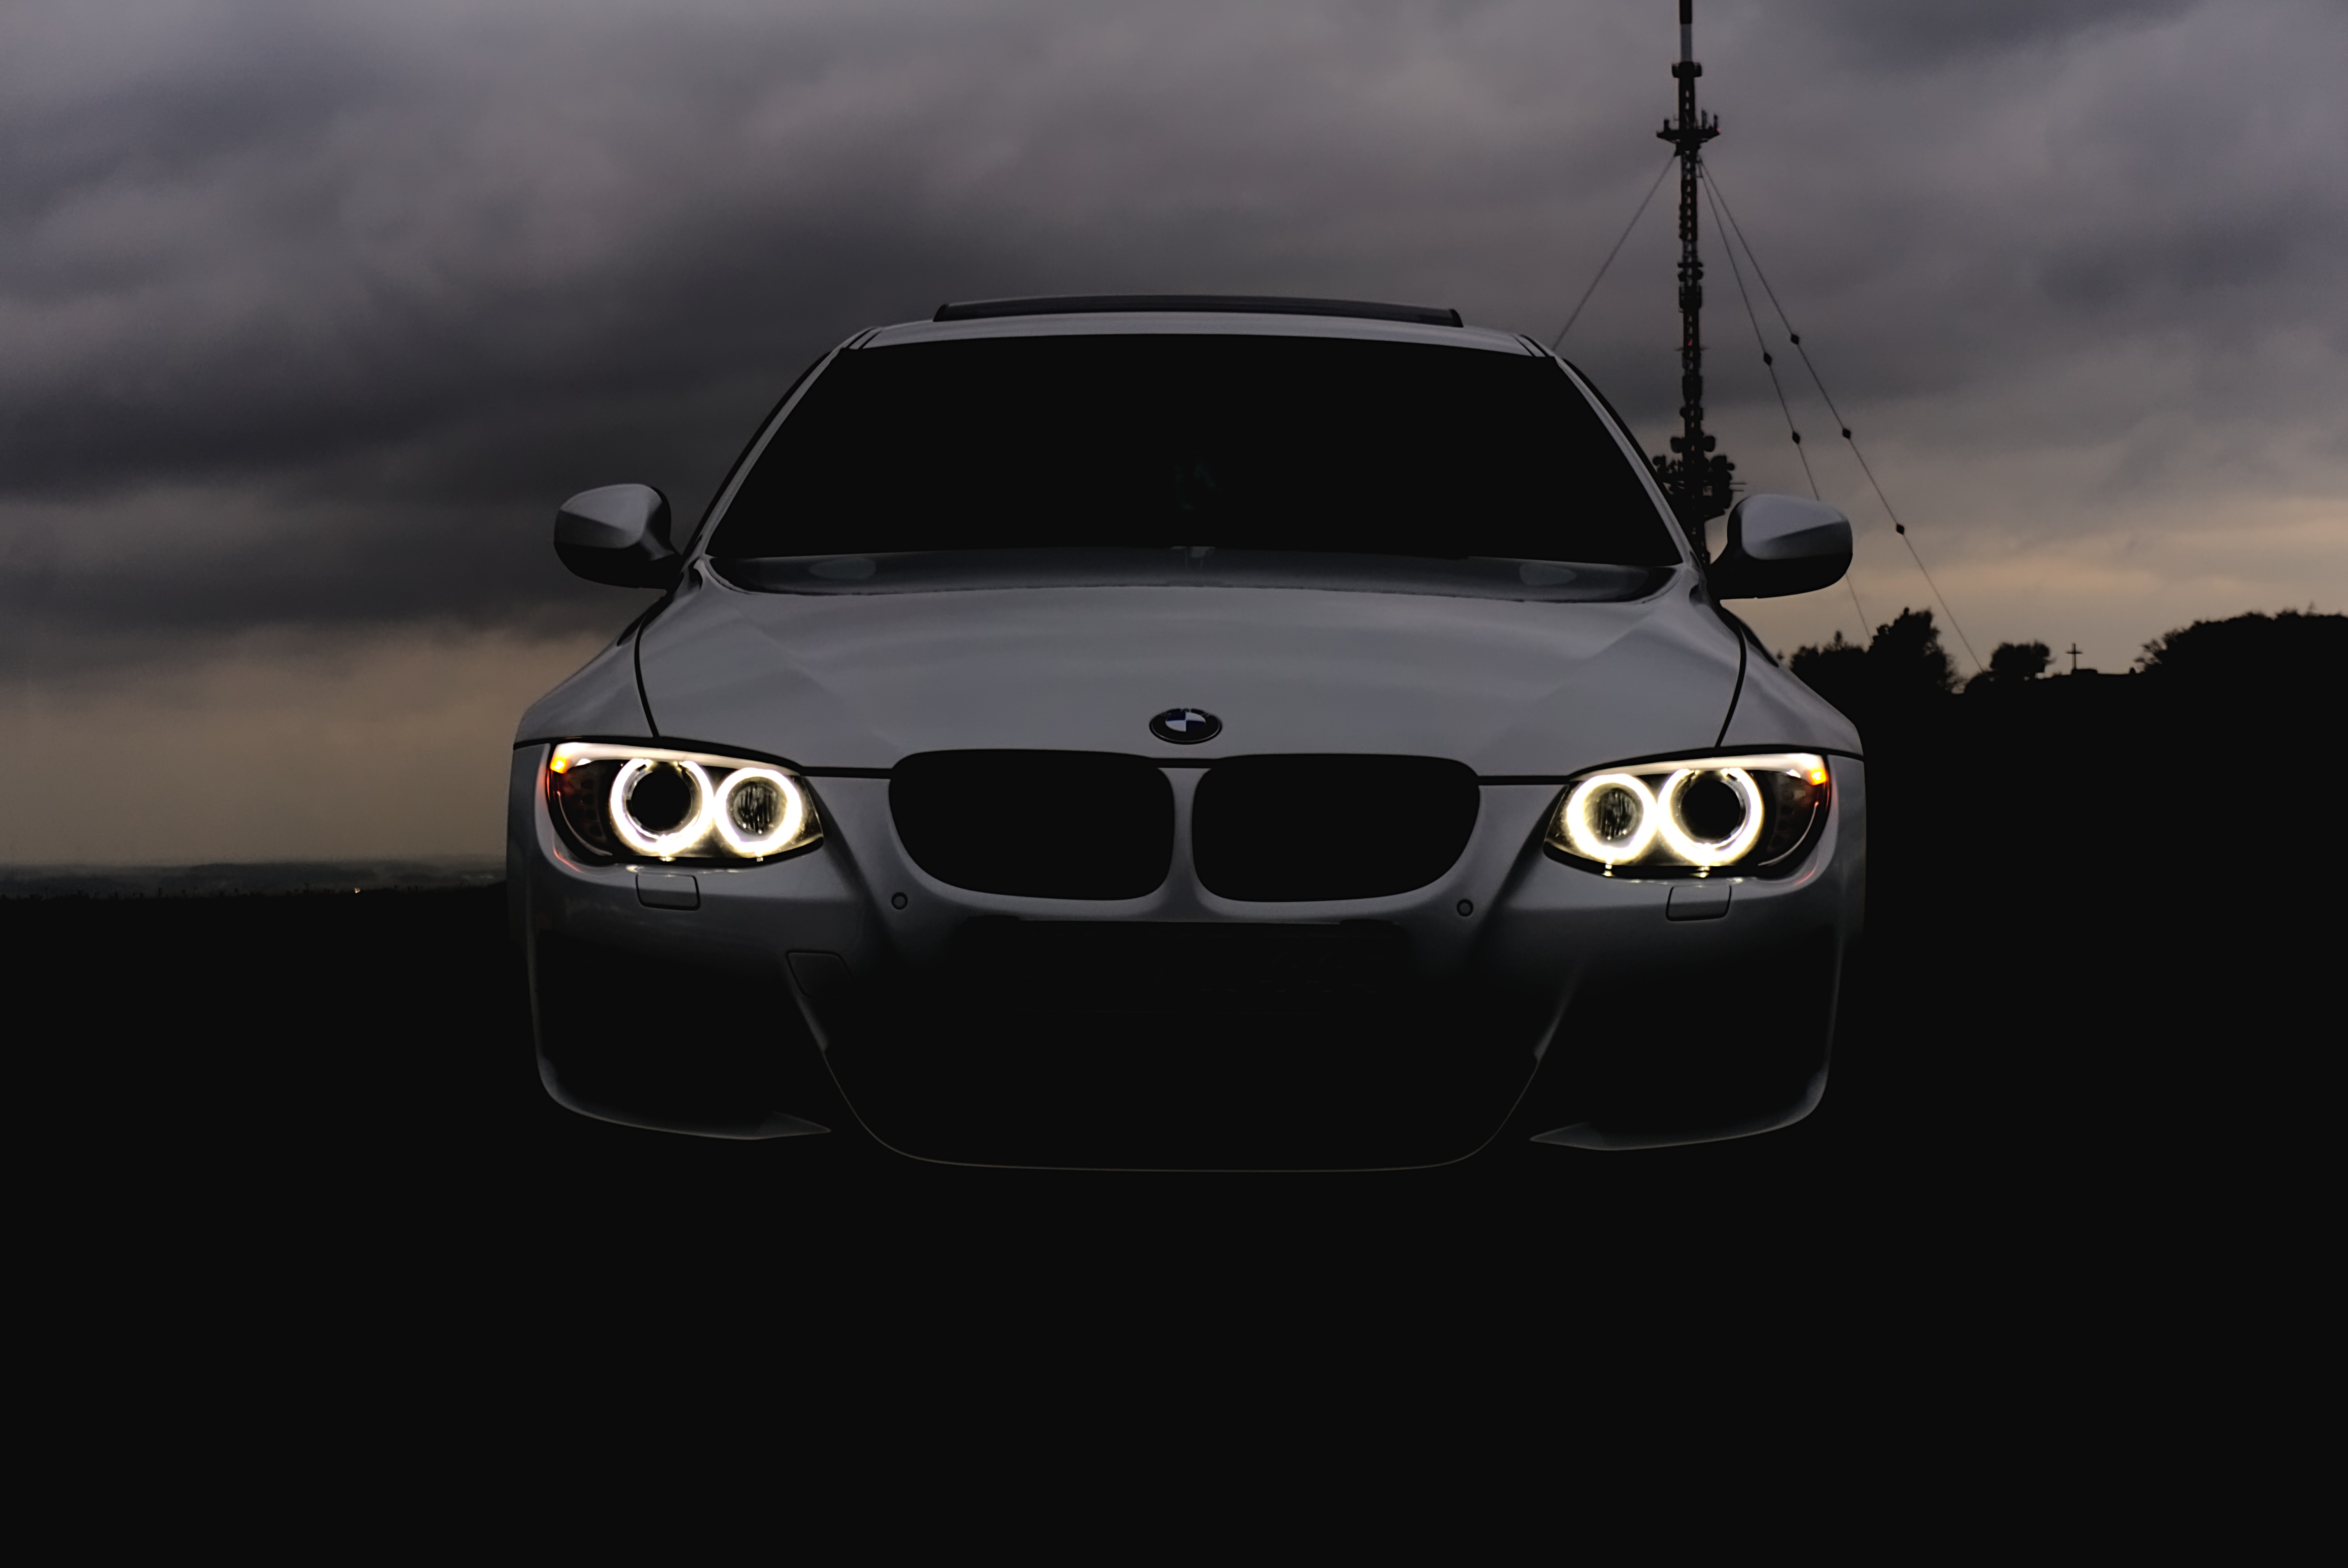 Download background car, bmw, cars, clouds, lights, mainly cloudy, overcast, headlights